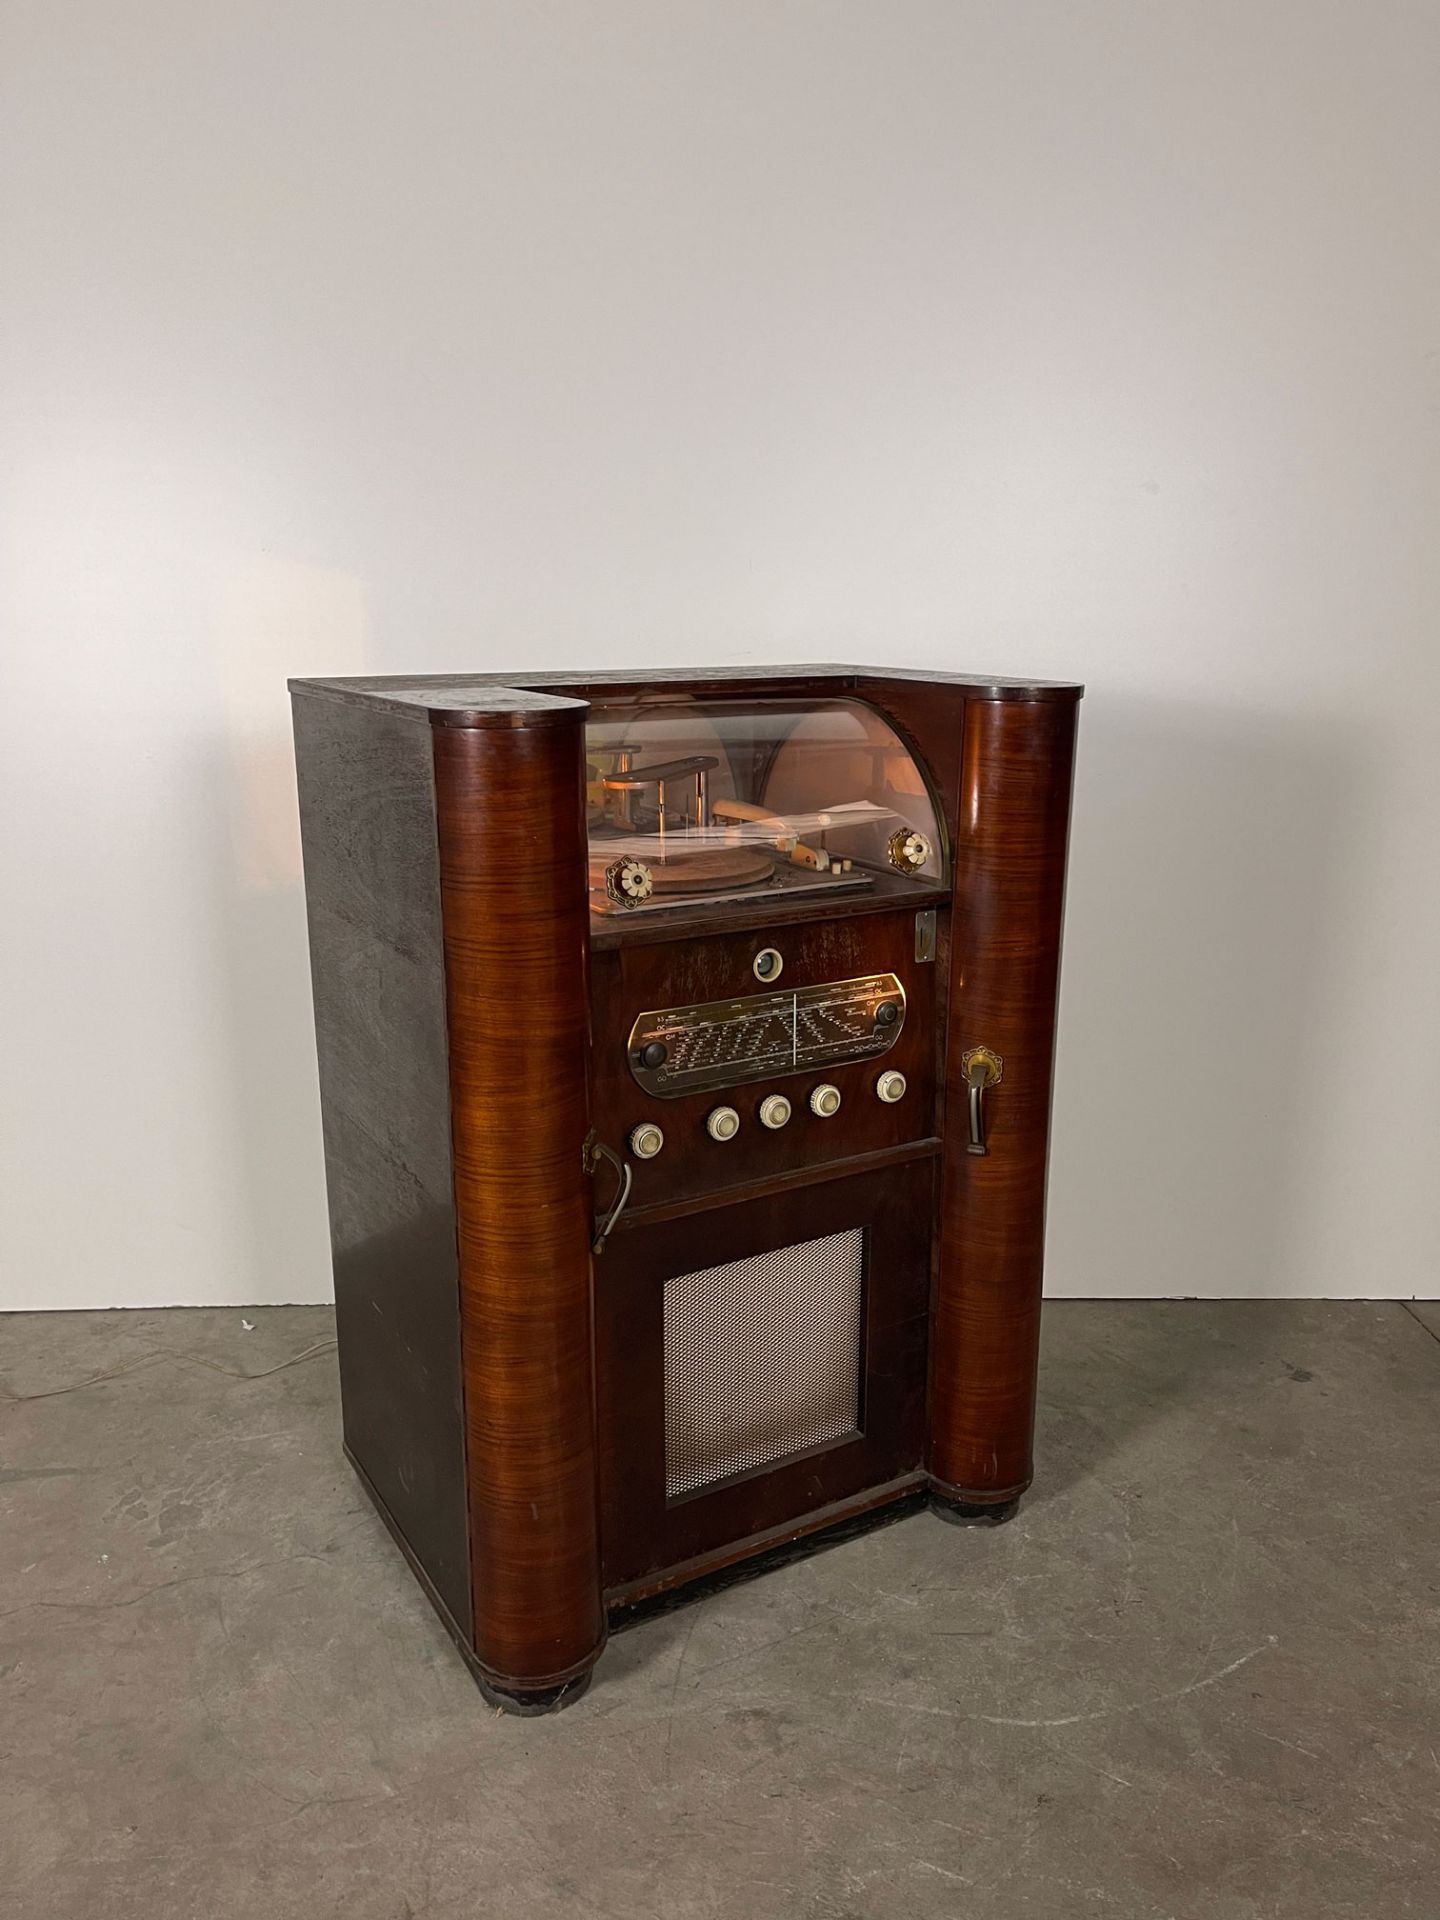 Mid-Fifties Valcke Heule Belgian Coin-Op Radio & Record Player - Image 3 of 15